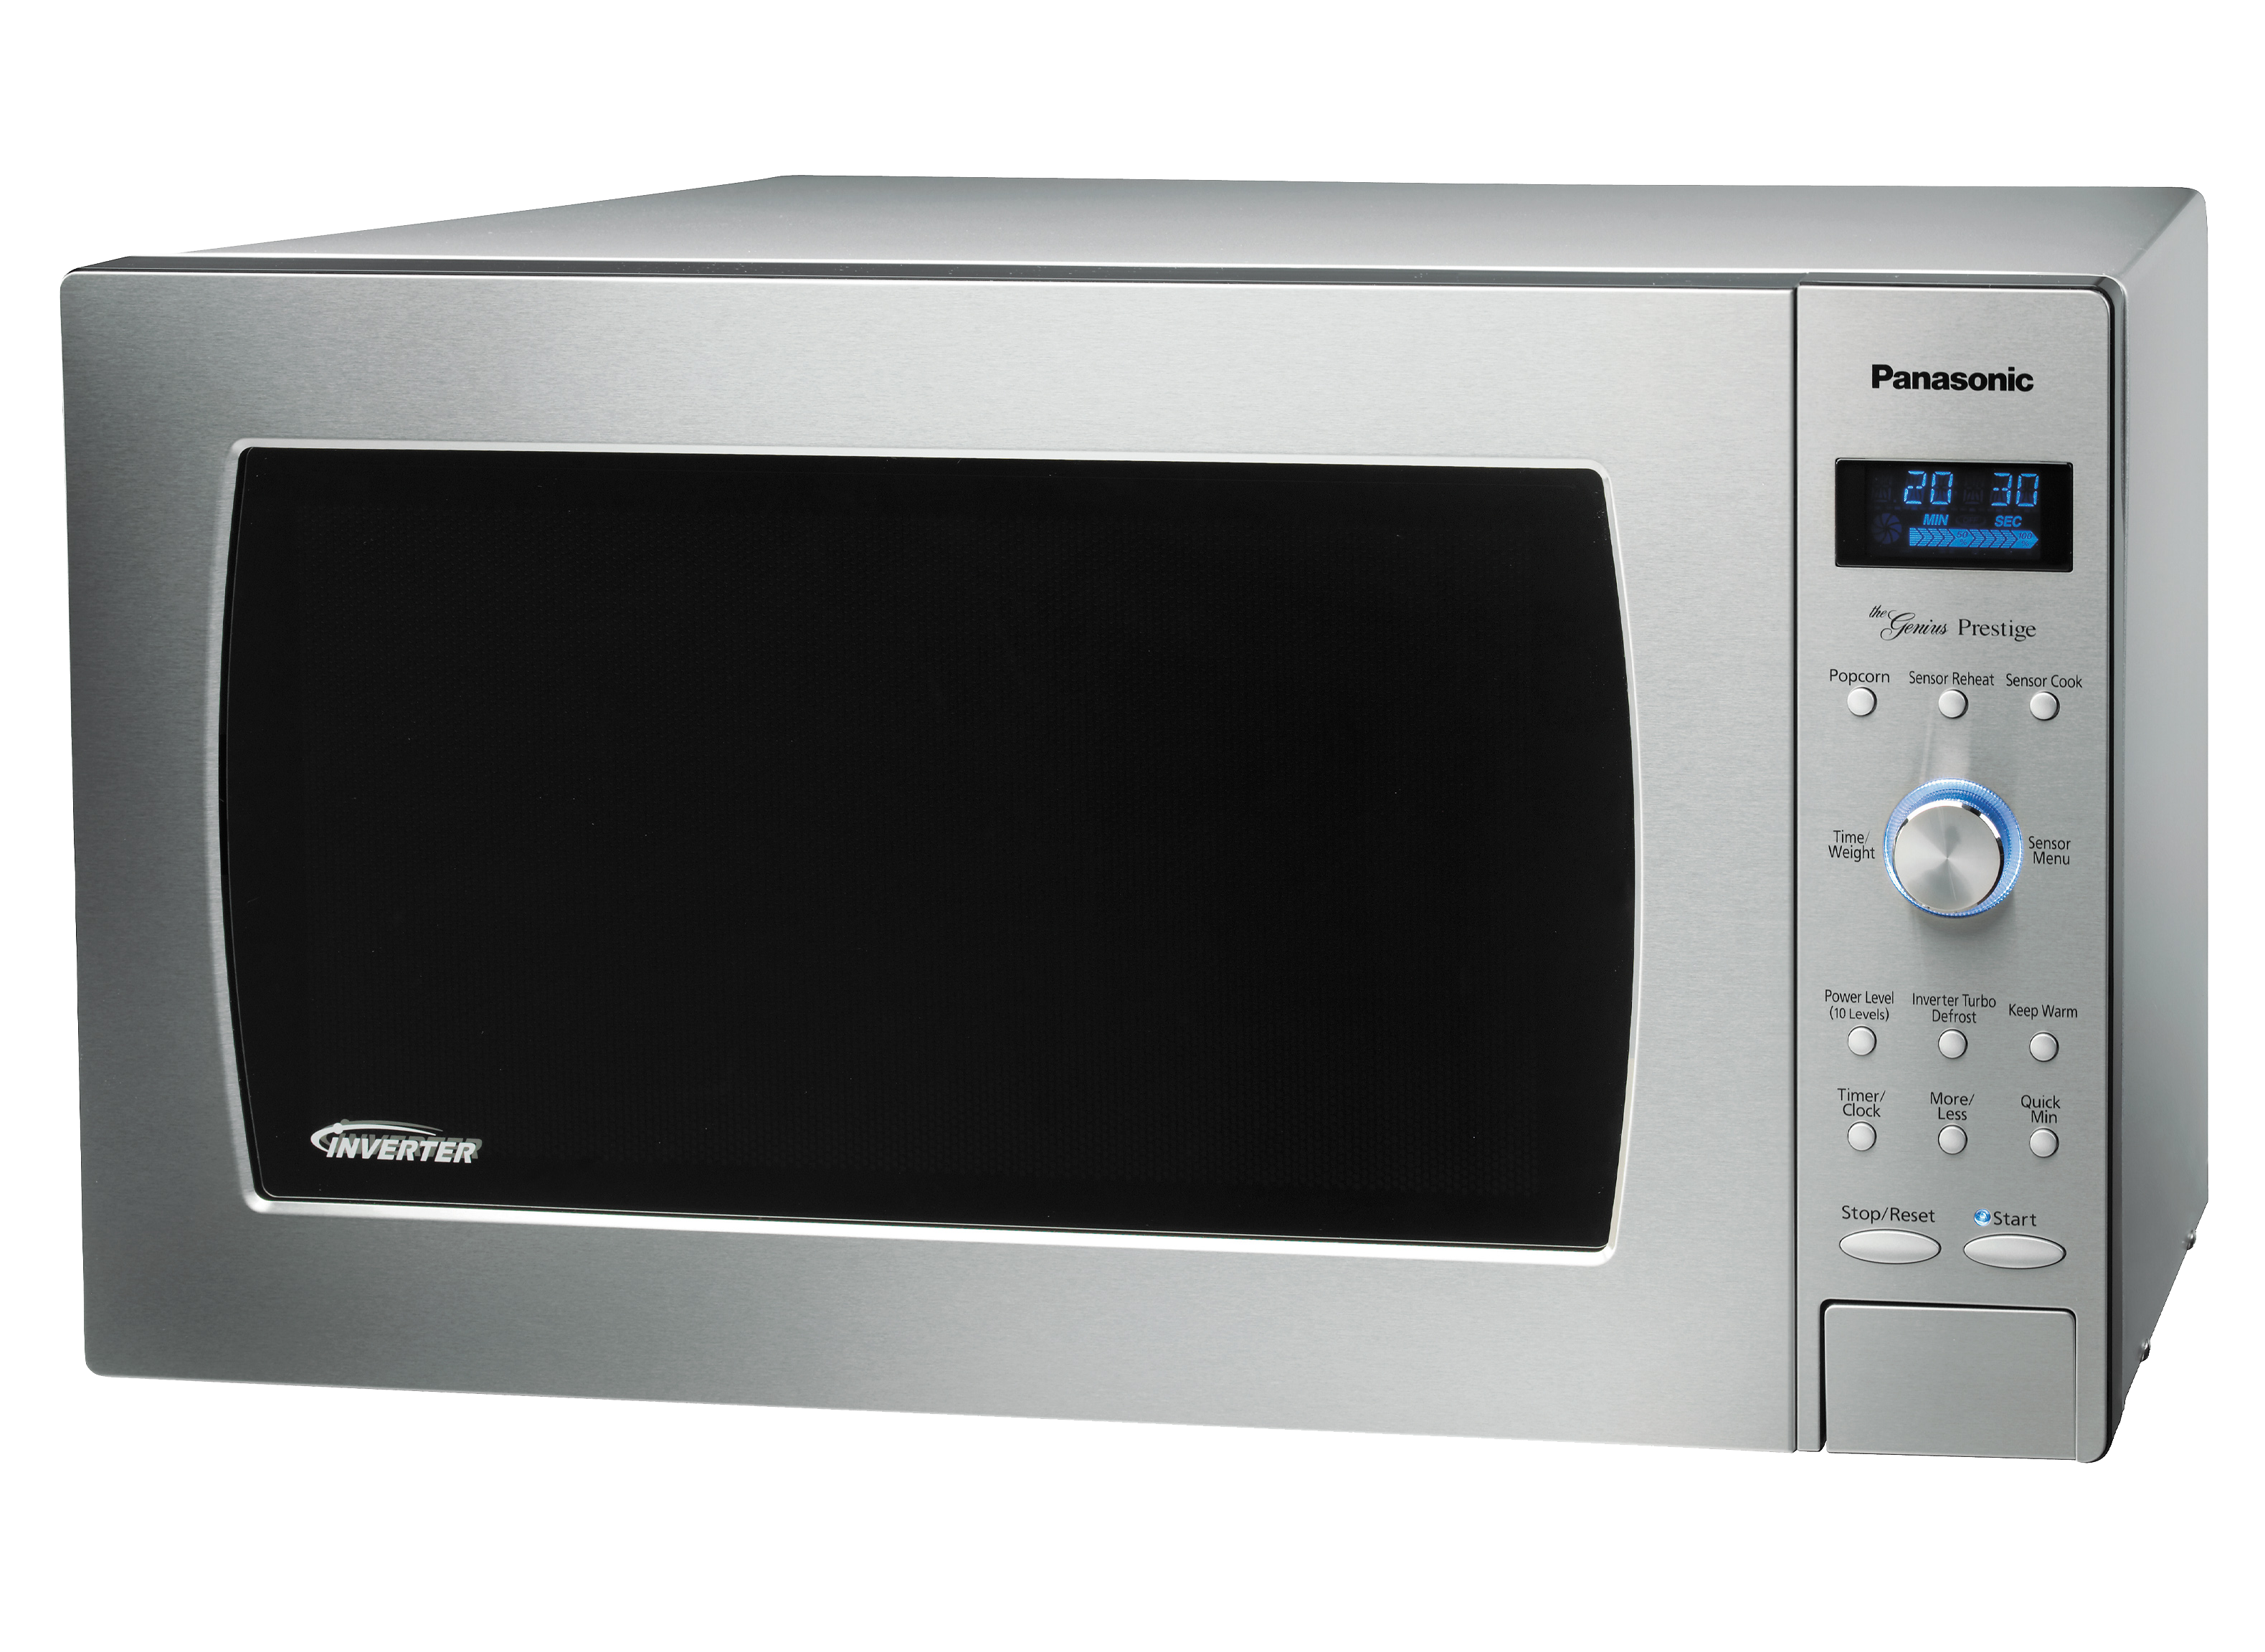 https://crdms.images.consumerreports.org/prod/products/cr/models/123573-large-countertop-microwaves-panasonic-nn-sd987sa-10032010.png